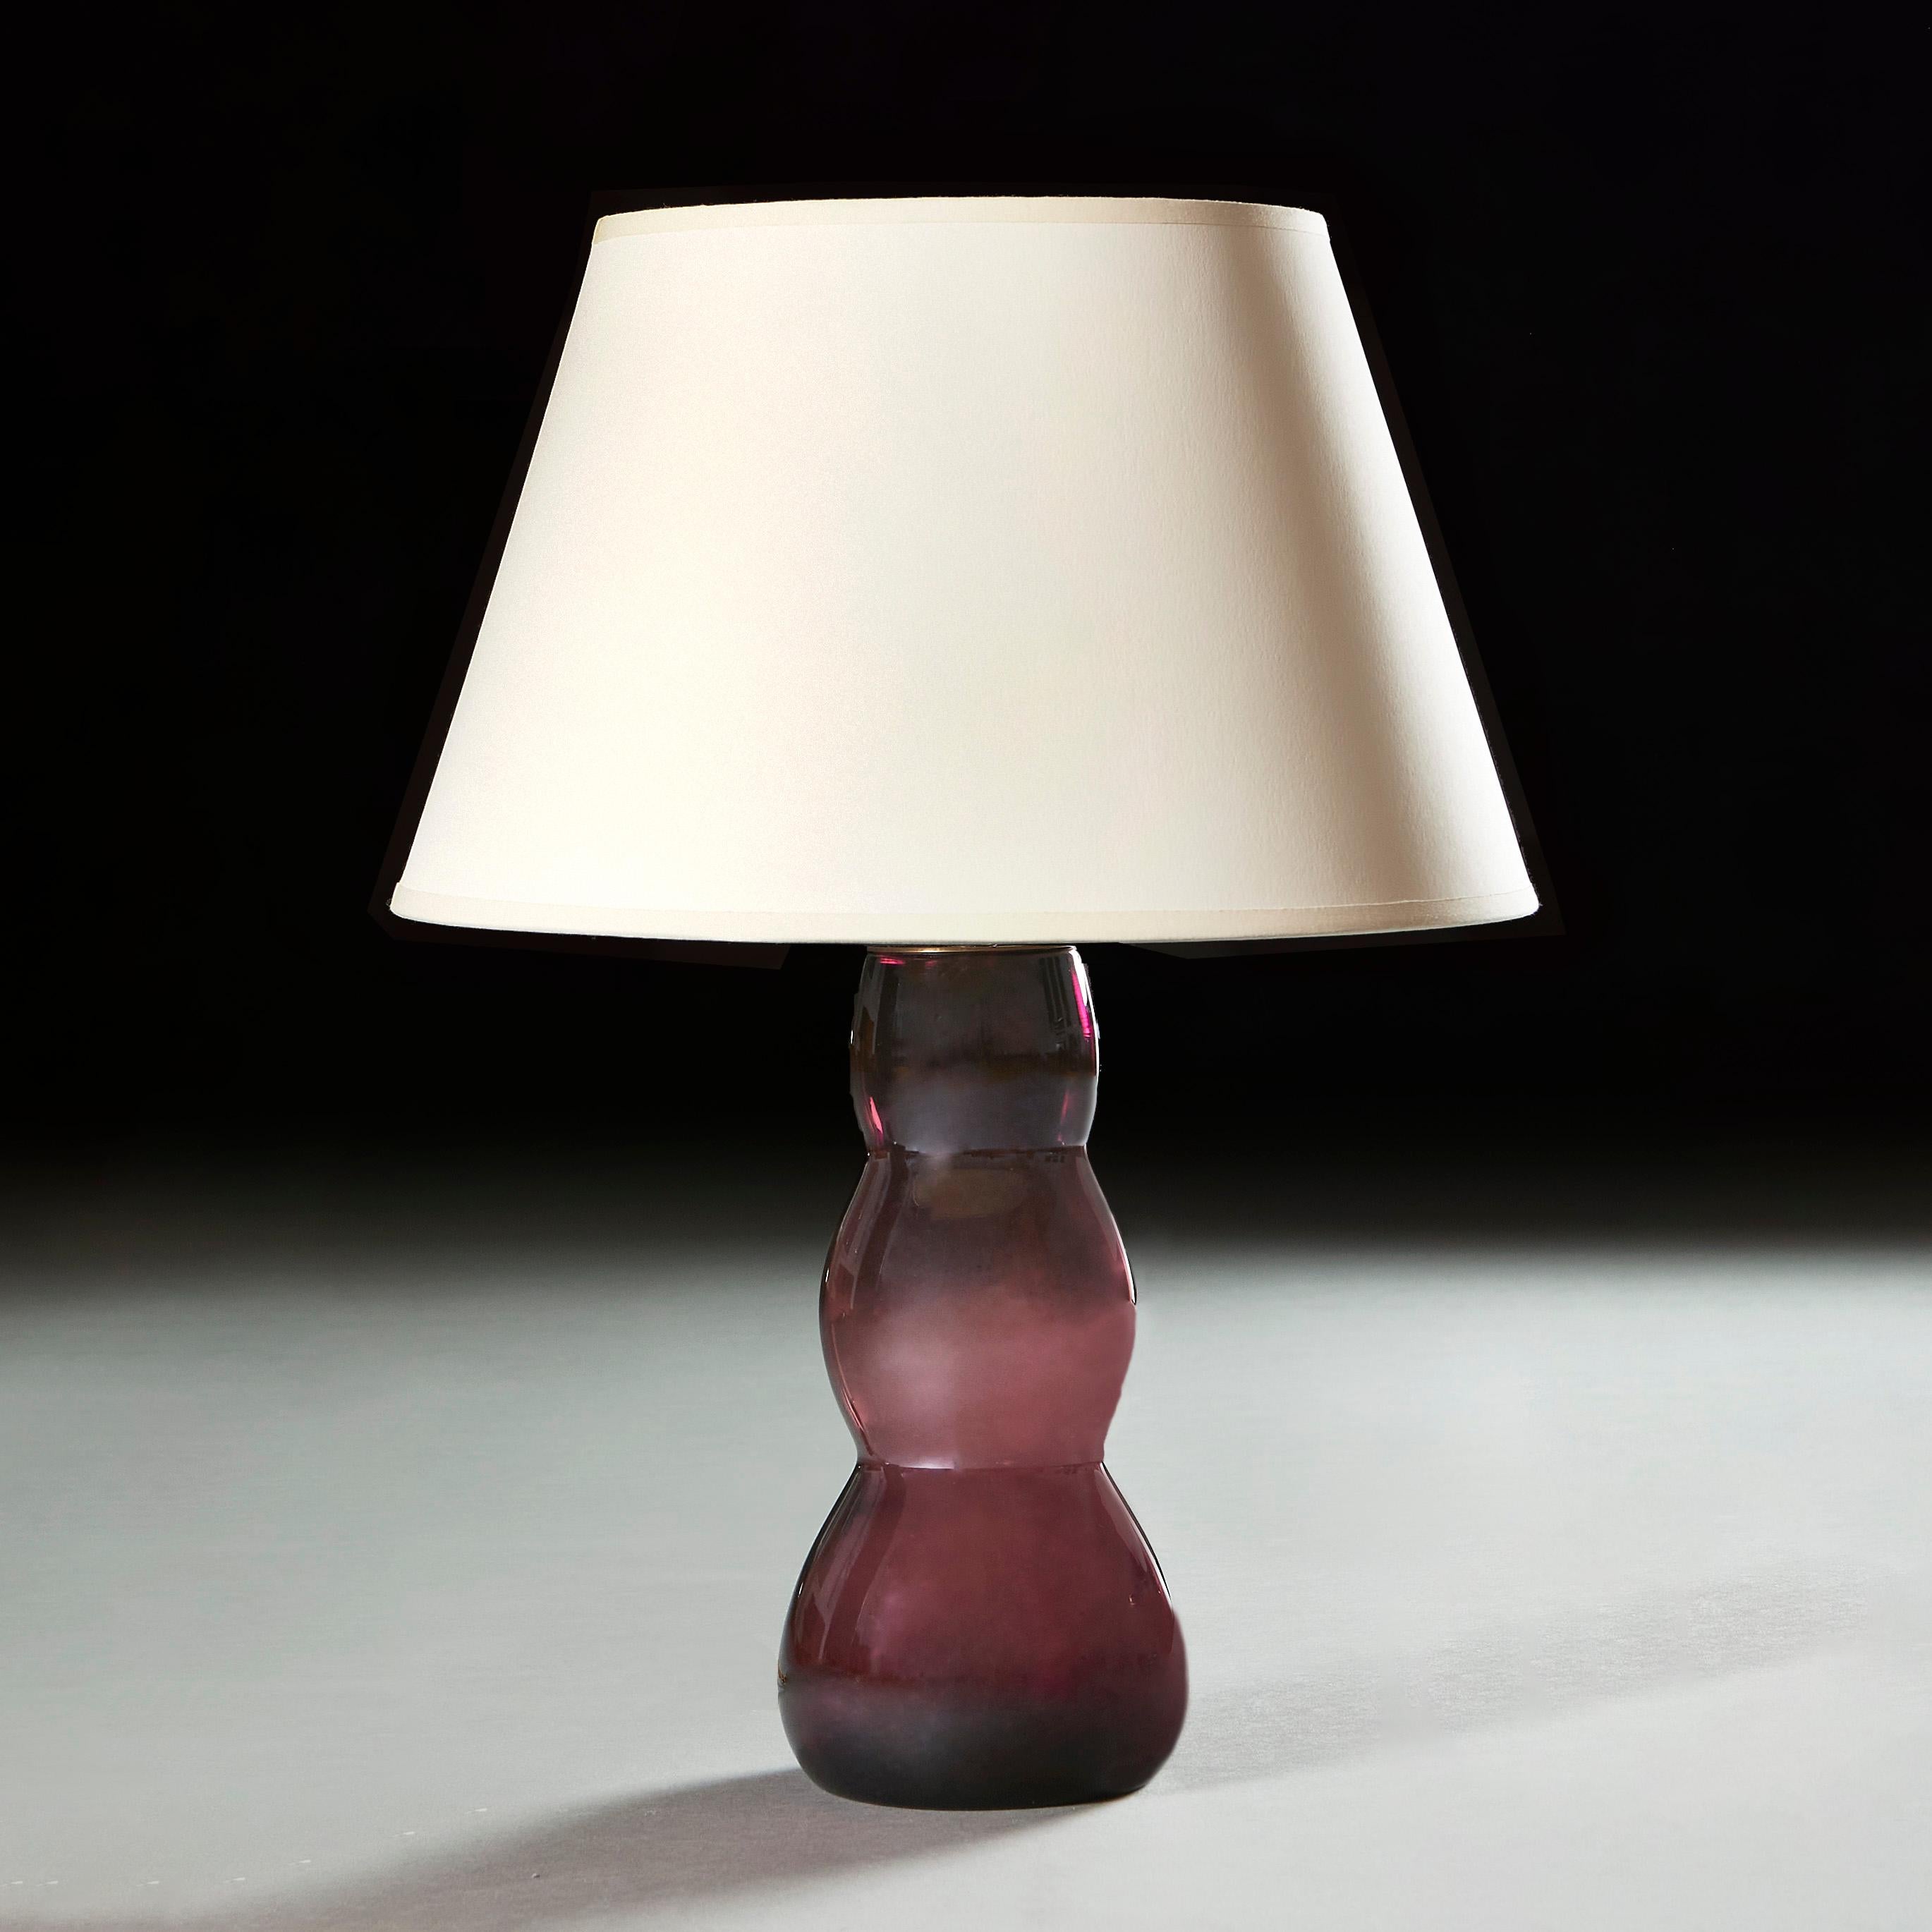 France, circa 1950.

A midcentury French art glass vase of aubergine colour and triple gourd form, now wired as a lamp.

Measures : Height of vase cm 30.50cm
Height with shade cm 55.50cm
Diameter of base cm 14.00cm.

Please note: This is